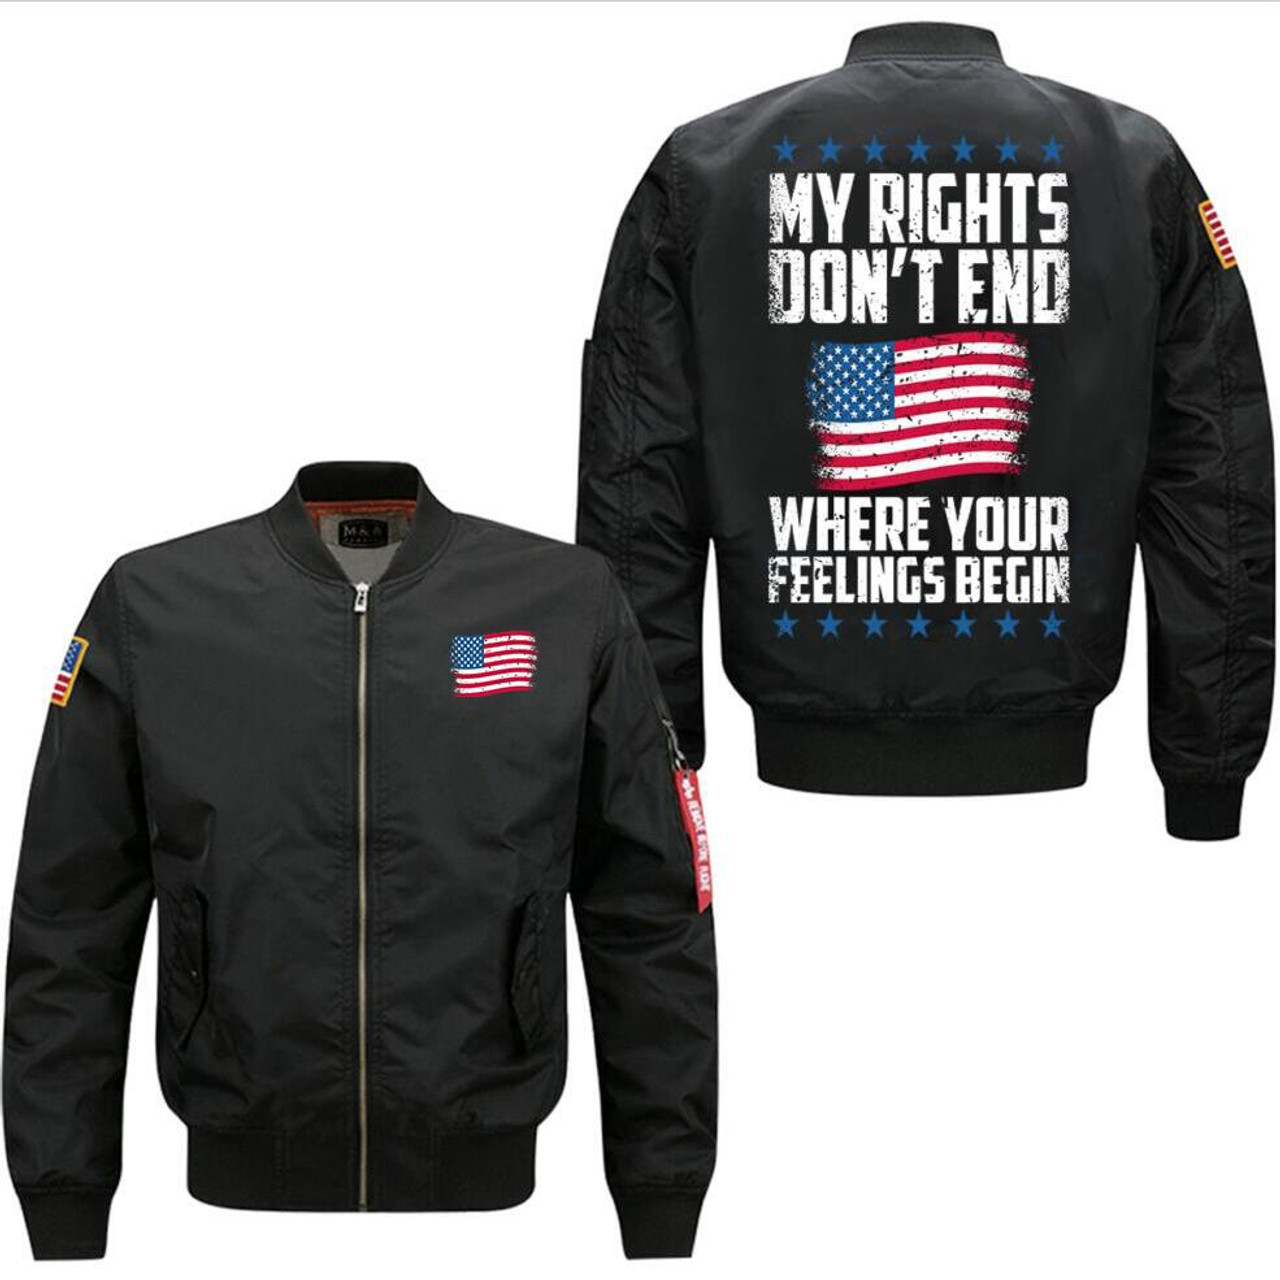 **(OFFICIAL-2ND-AMENDMENT-FLIGHT-JACKETS/MY-RIGHTS-DON'T-END,WHERE-YOUR-FEELINGS-BEGIN & WAVING-PATRIOTIC-FLAG,NICE-PREMIUM-CUSTOM-3D-GRAPHIC-PRINTED,DOUBLE-SIDED-BOMBER/MA-1 FLIGHT-JACKETS,COMES-IN-CLASSIC-MIDNIGHT-BLACK)**